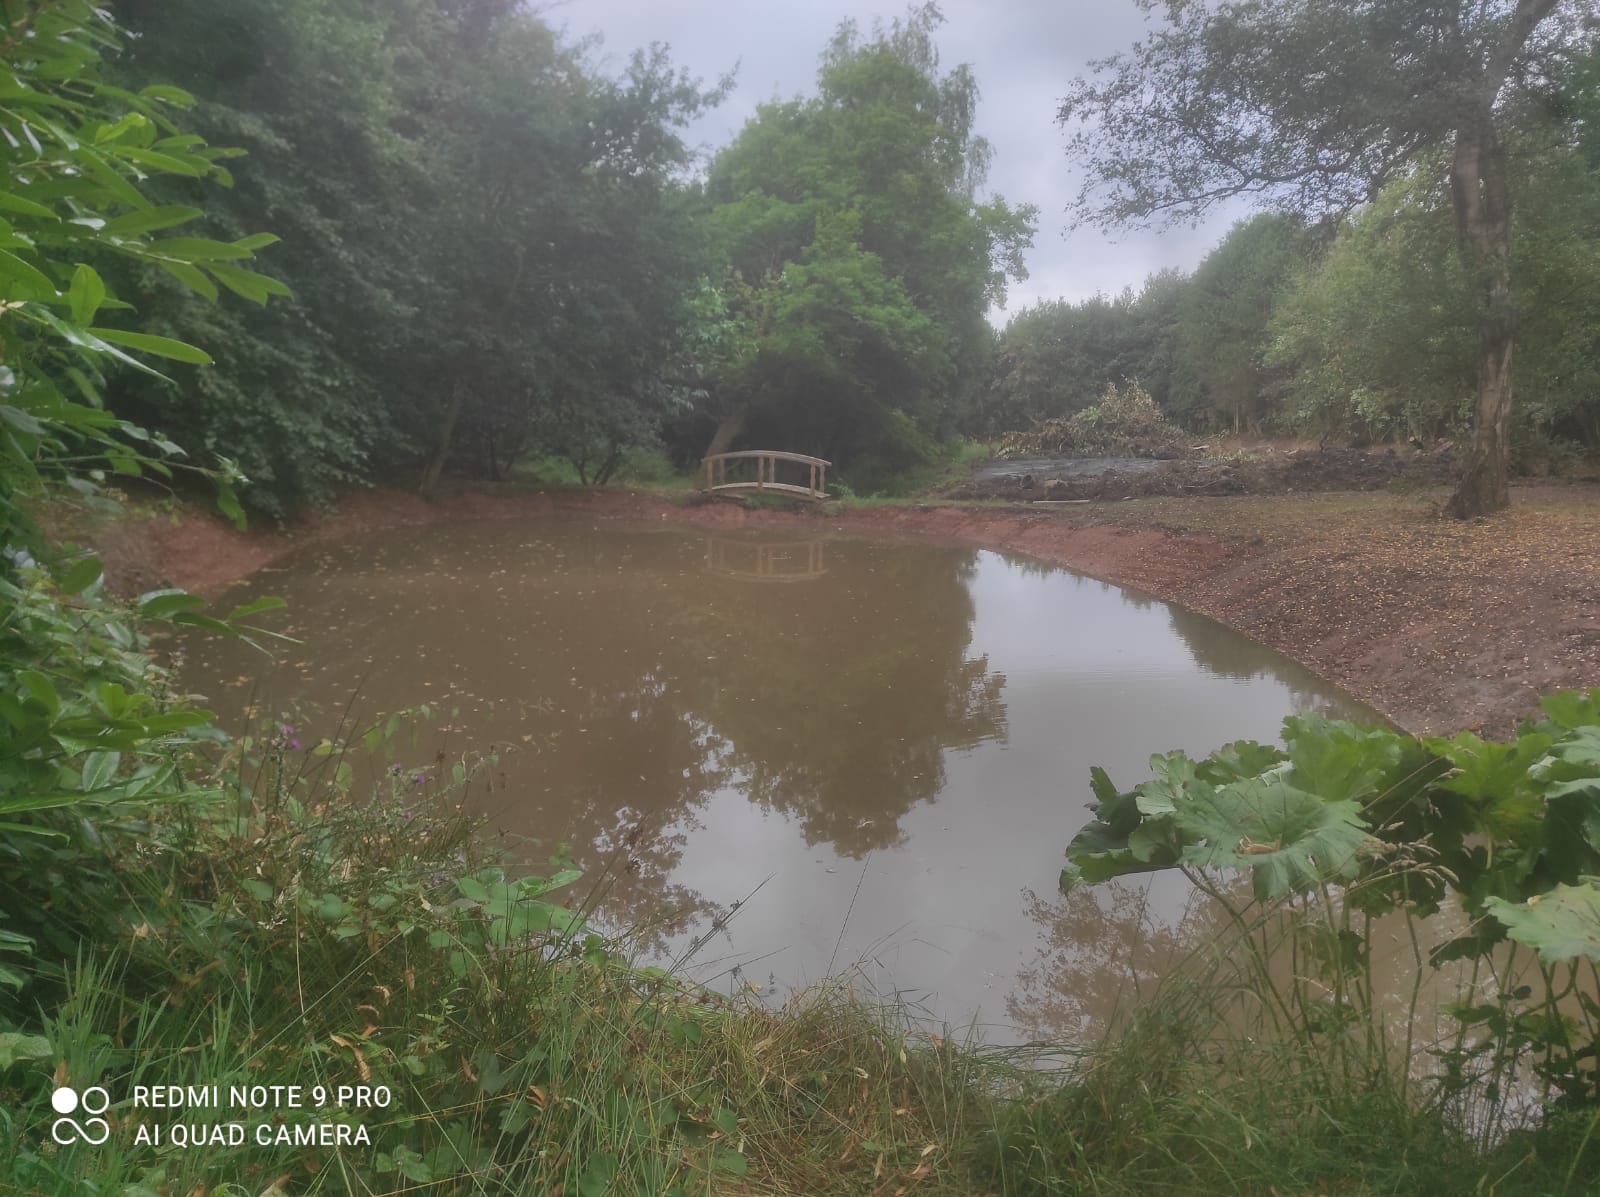 Reform neglected pond – Aug 5th 2021